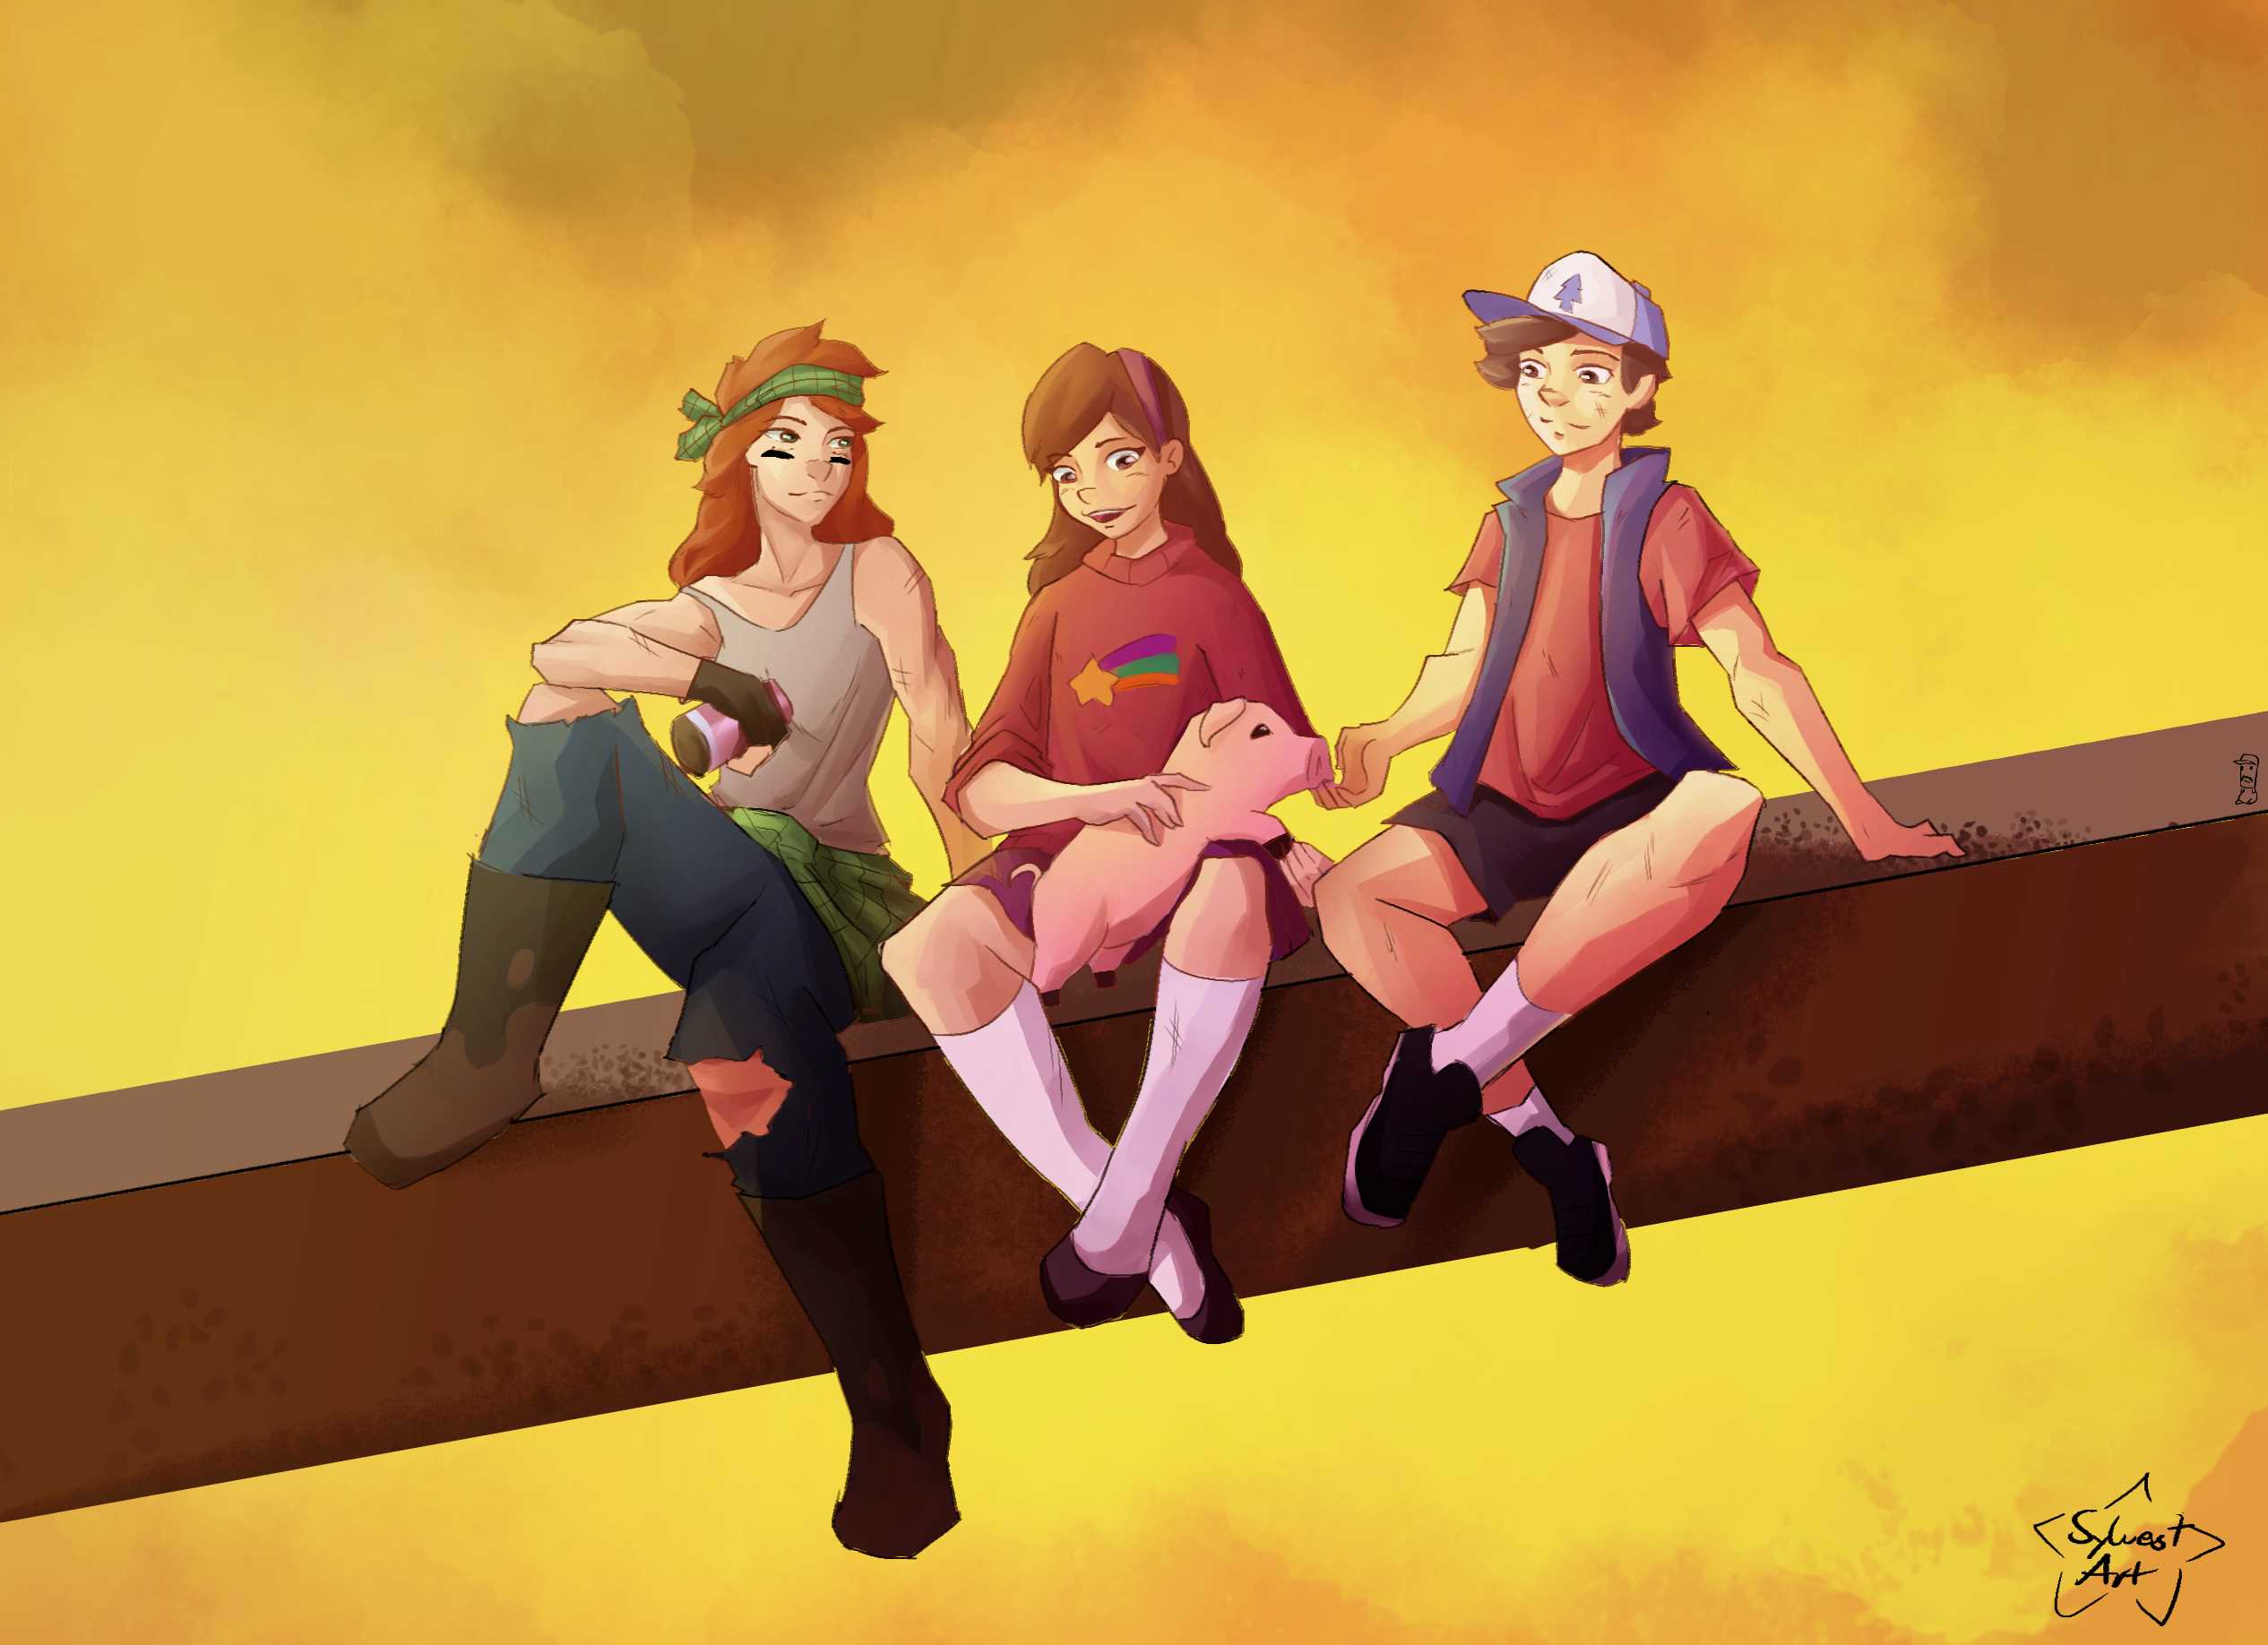 Mabel, Waddles, Dipper and Wendy from Gravity Falls sitting next 
          to each other